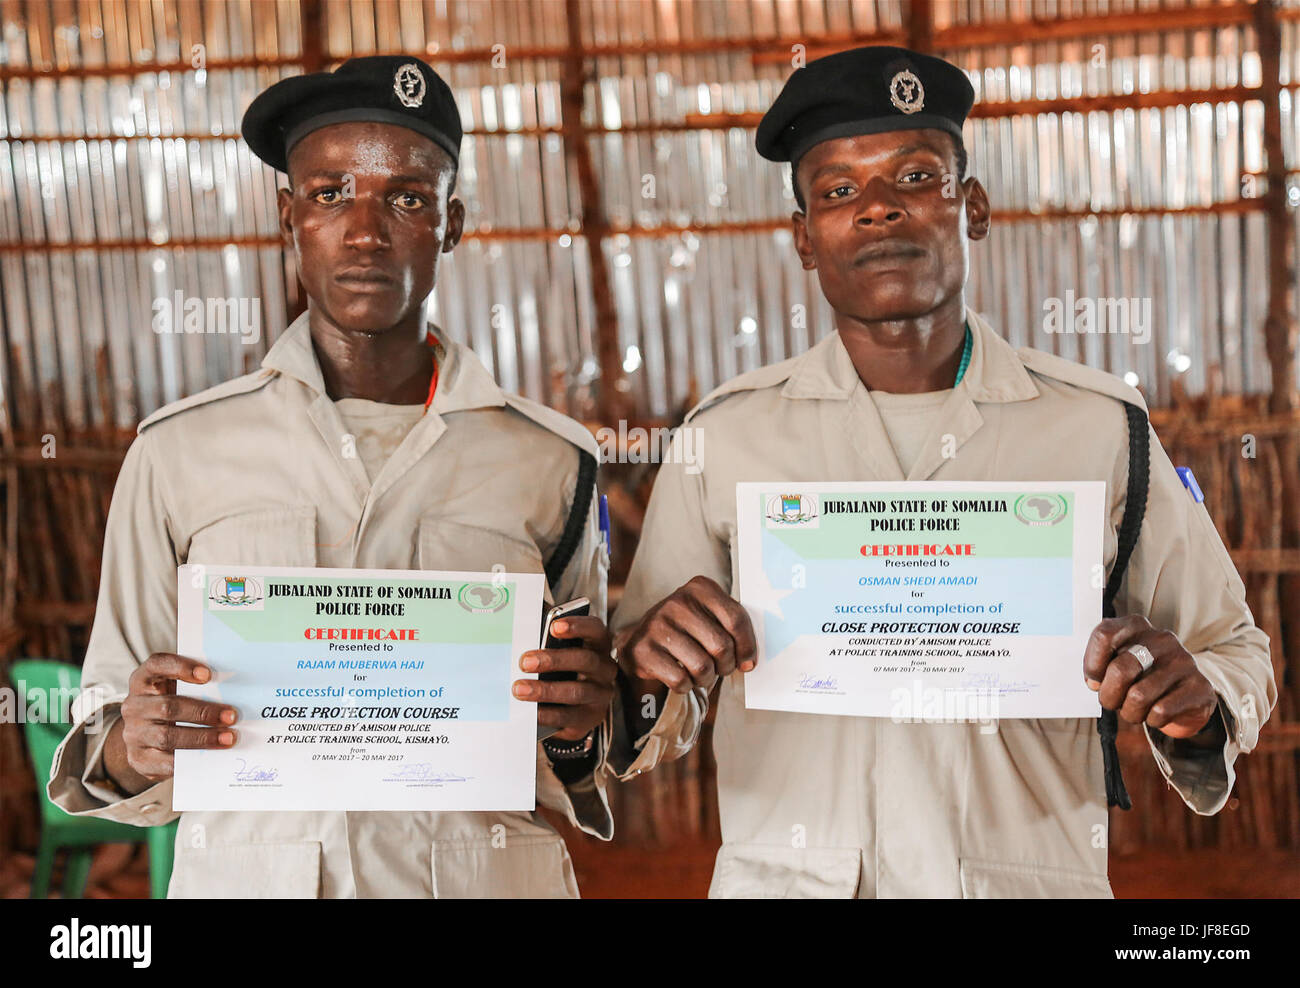 Police Trainees hold certificates they received during a close protection course conducted by the African Union Mission in Somalia (AMISOM), in Kismayo Somalia on May 20, 2017. AMISOM Photo Stock Photo